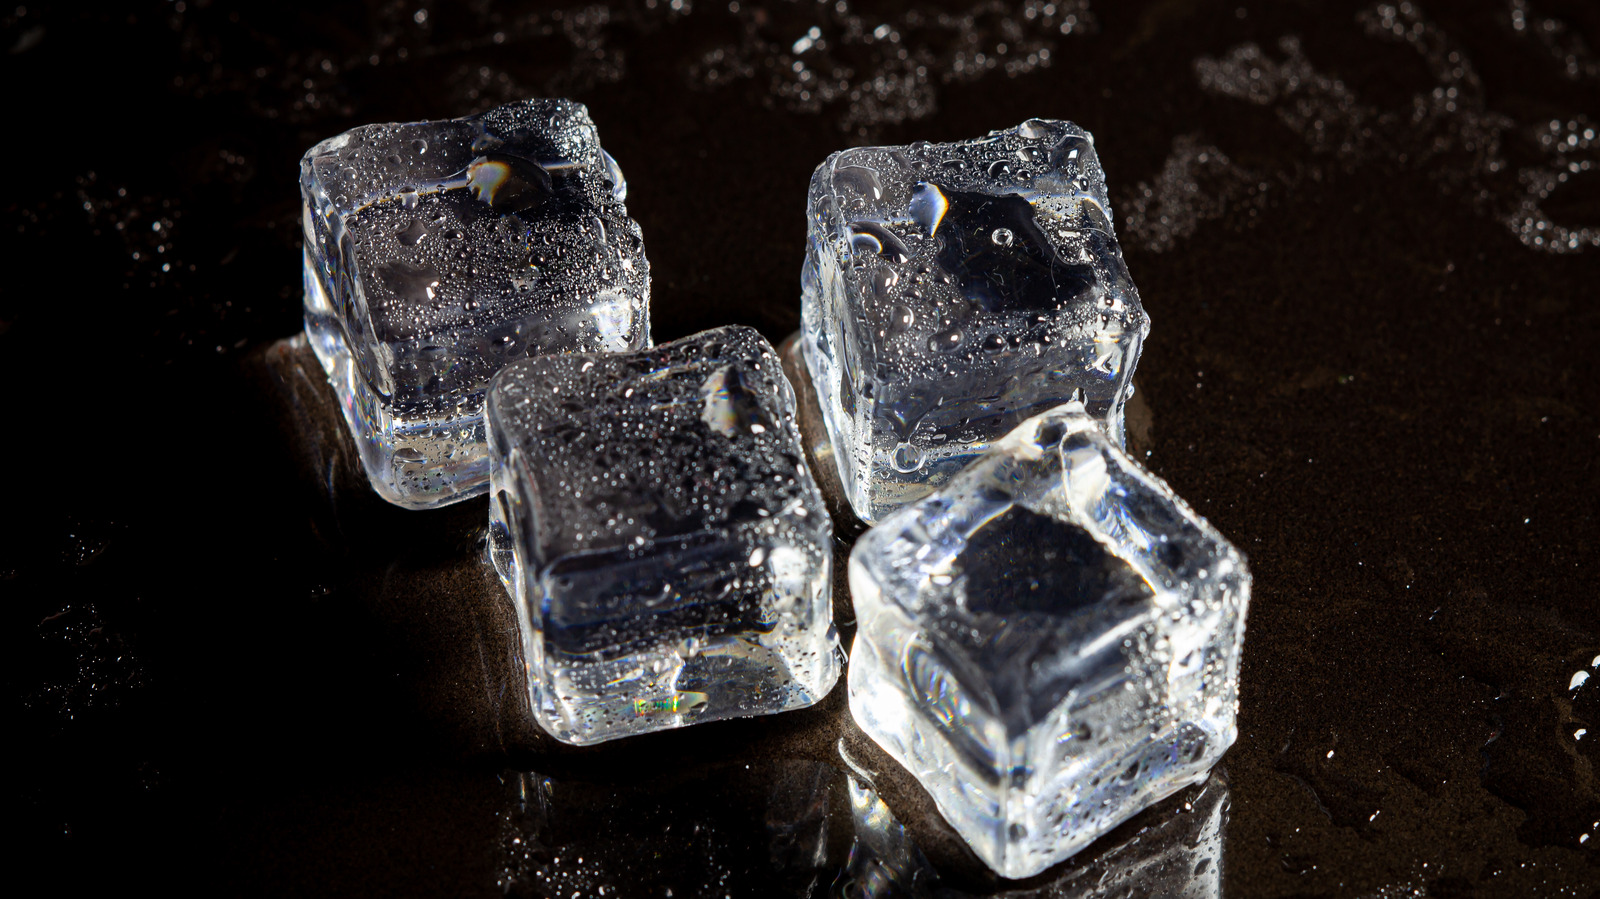 https://www.foodrepublic.com/img/gallery/hot-water-is-the-key-to-crystal-clear-ice-cubes/l-intro-1688563706.jpg